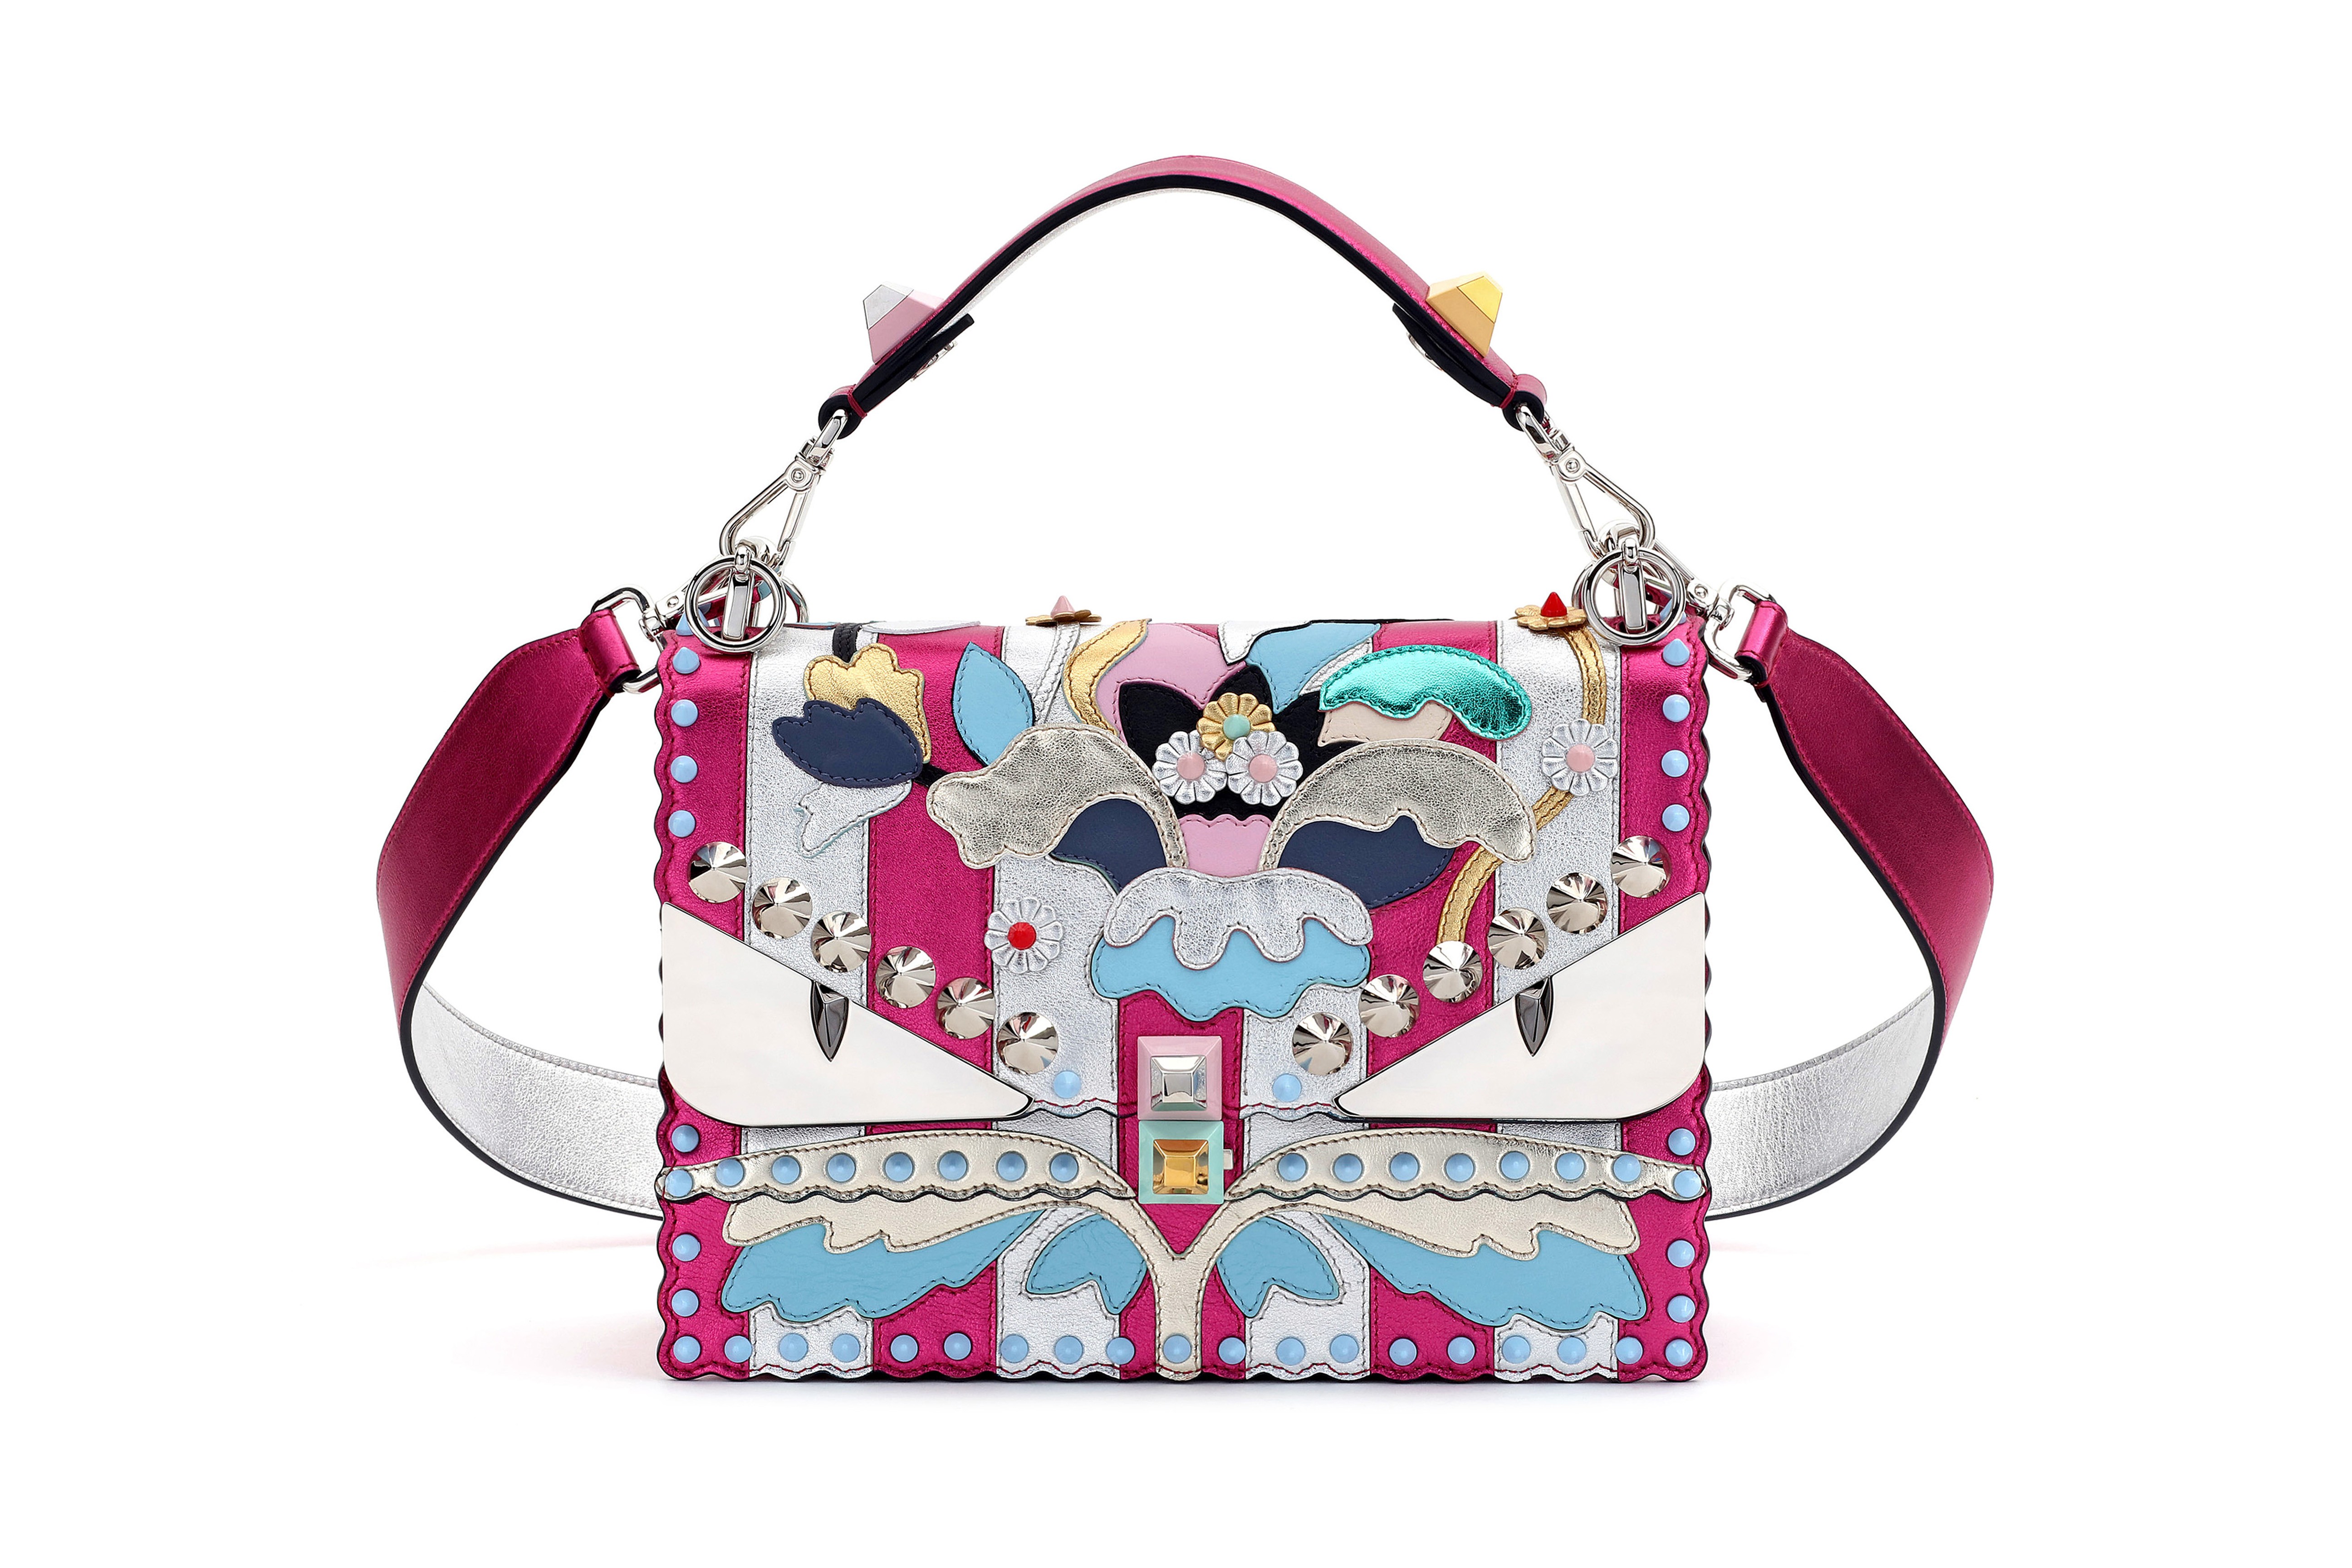 Take your pick of colourful summer accessories from Chloé, Fendi, Burberry and more